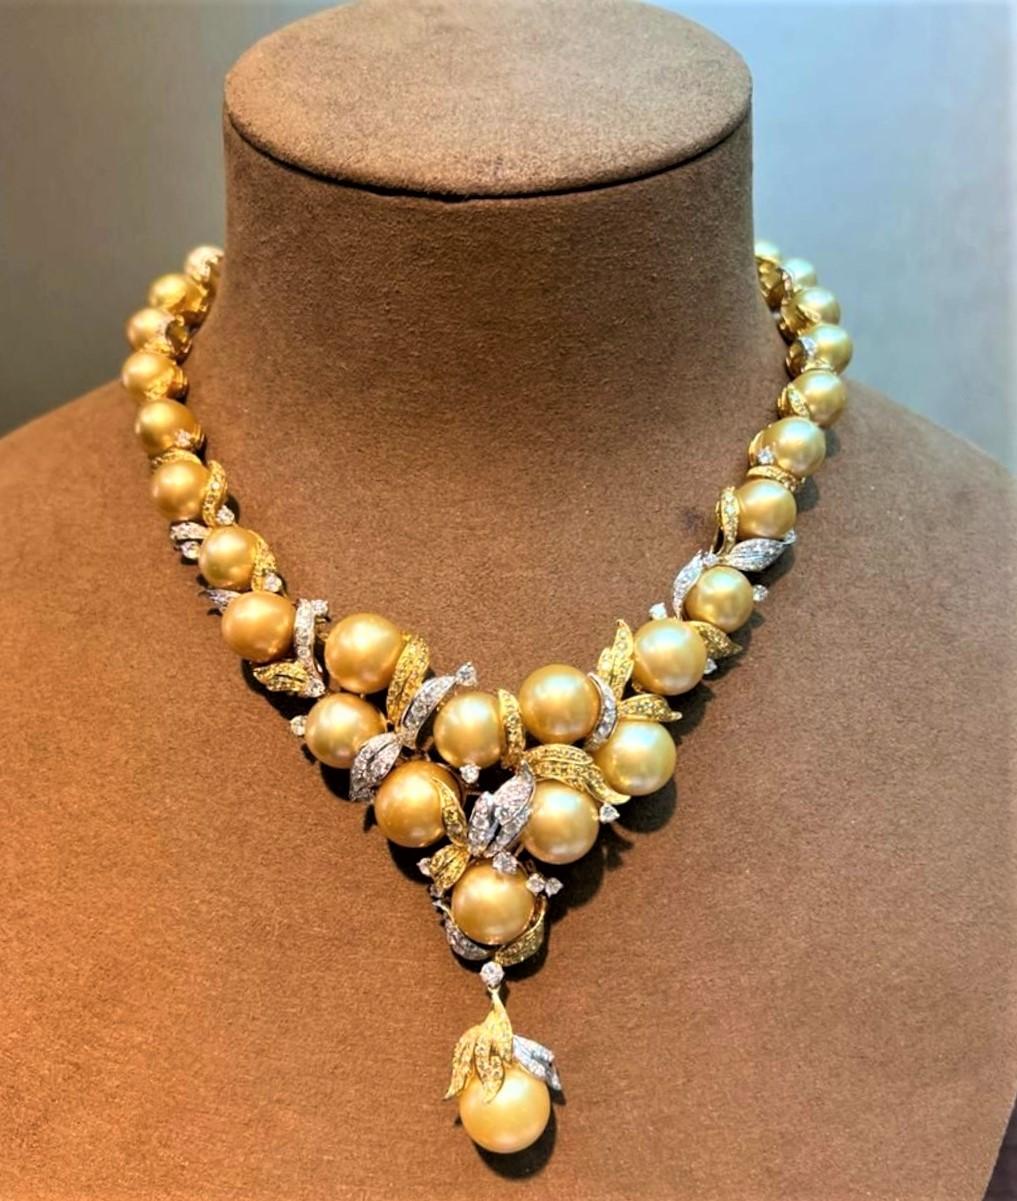 The Following Item we are offering is this Beautiful Rare Important 18KT White and Yellow Gold Pearl and Diamond Necklace. Necklace is comprised of Beautiful Magnificent High Luster Large 36 AA-AAA GOLDEN PRISTINE SOUTH SEA PEARLS that give off a